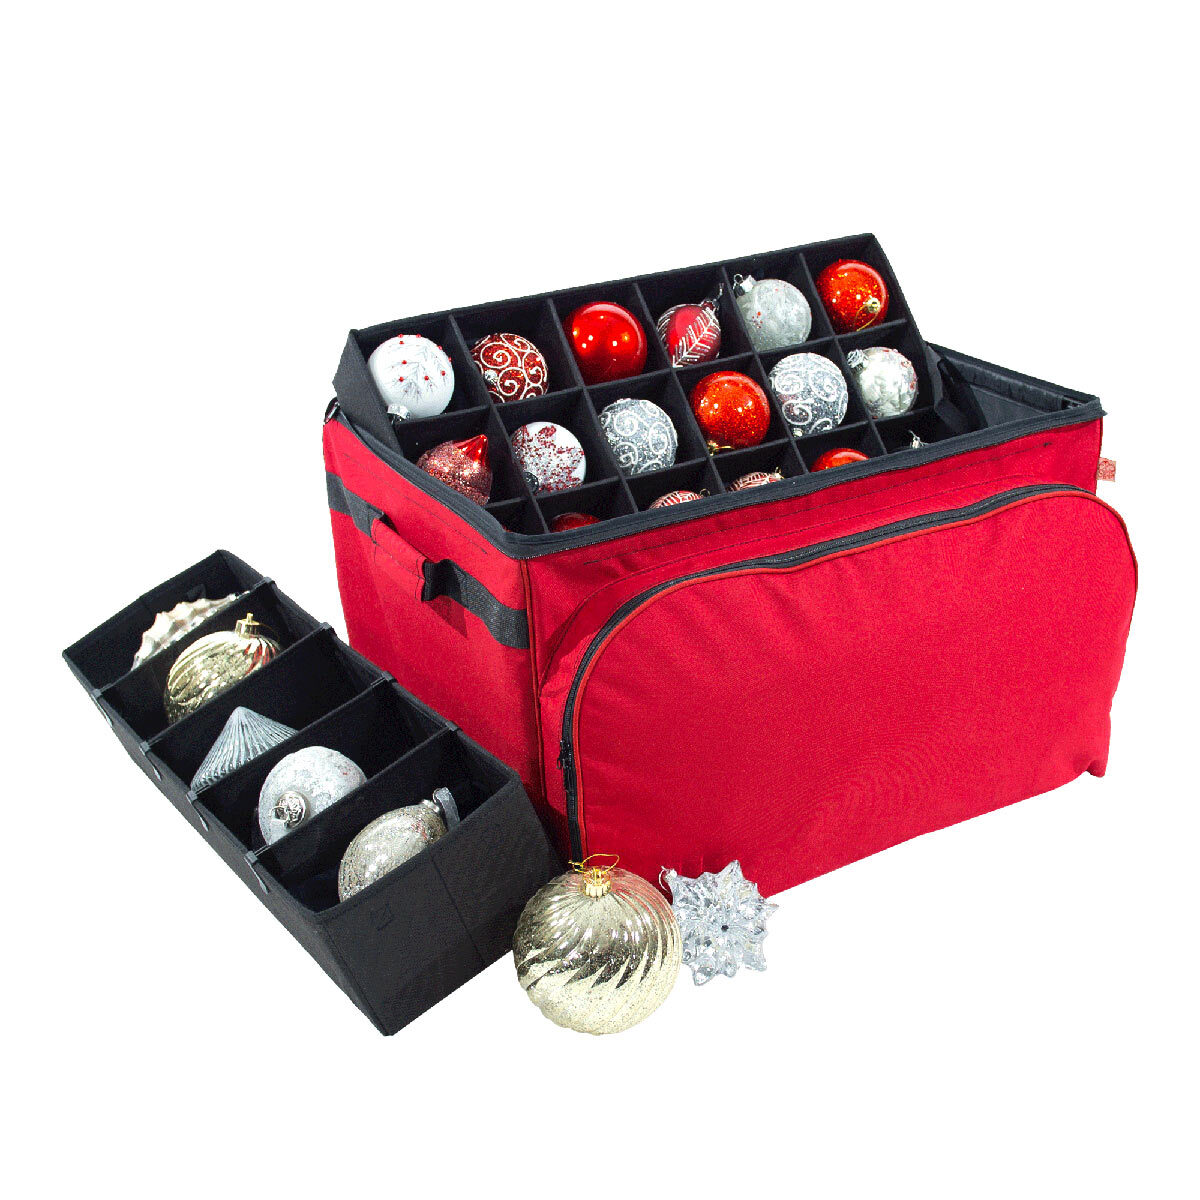 Christmas Ornament Storage Bag With 4 Trays